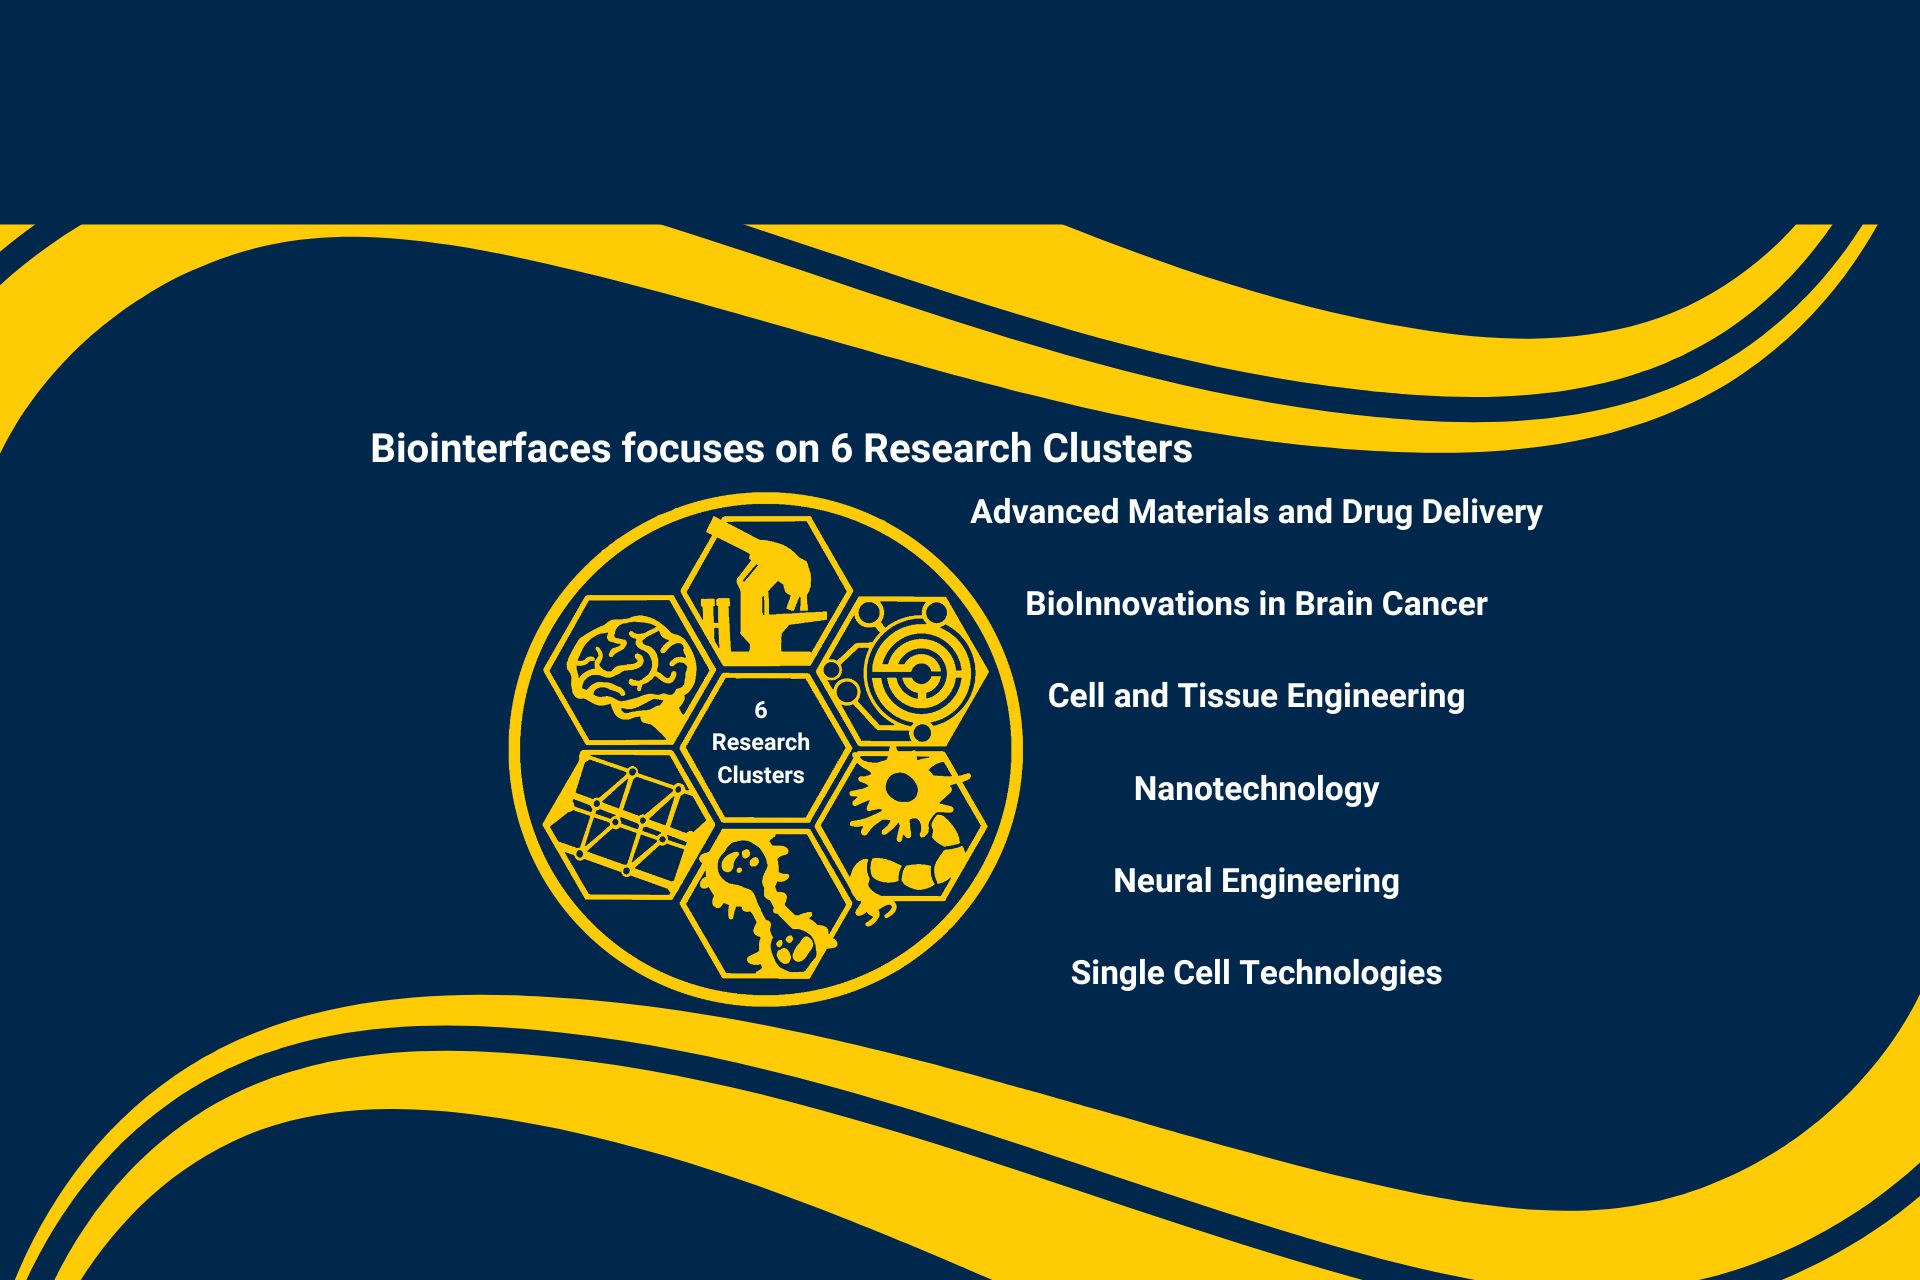 Biointerfaces focuses on 6 Research Clusters Advanced Materials and Drug Delivery BioInnovations in Brain Cancer Cell and Tissue Engineering Nanotechnology Neural Engineering Single Cell Technologies